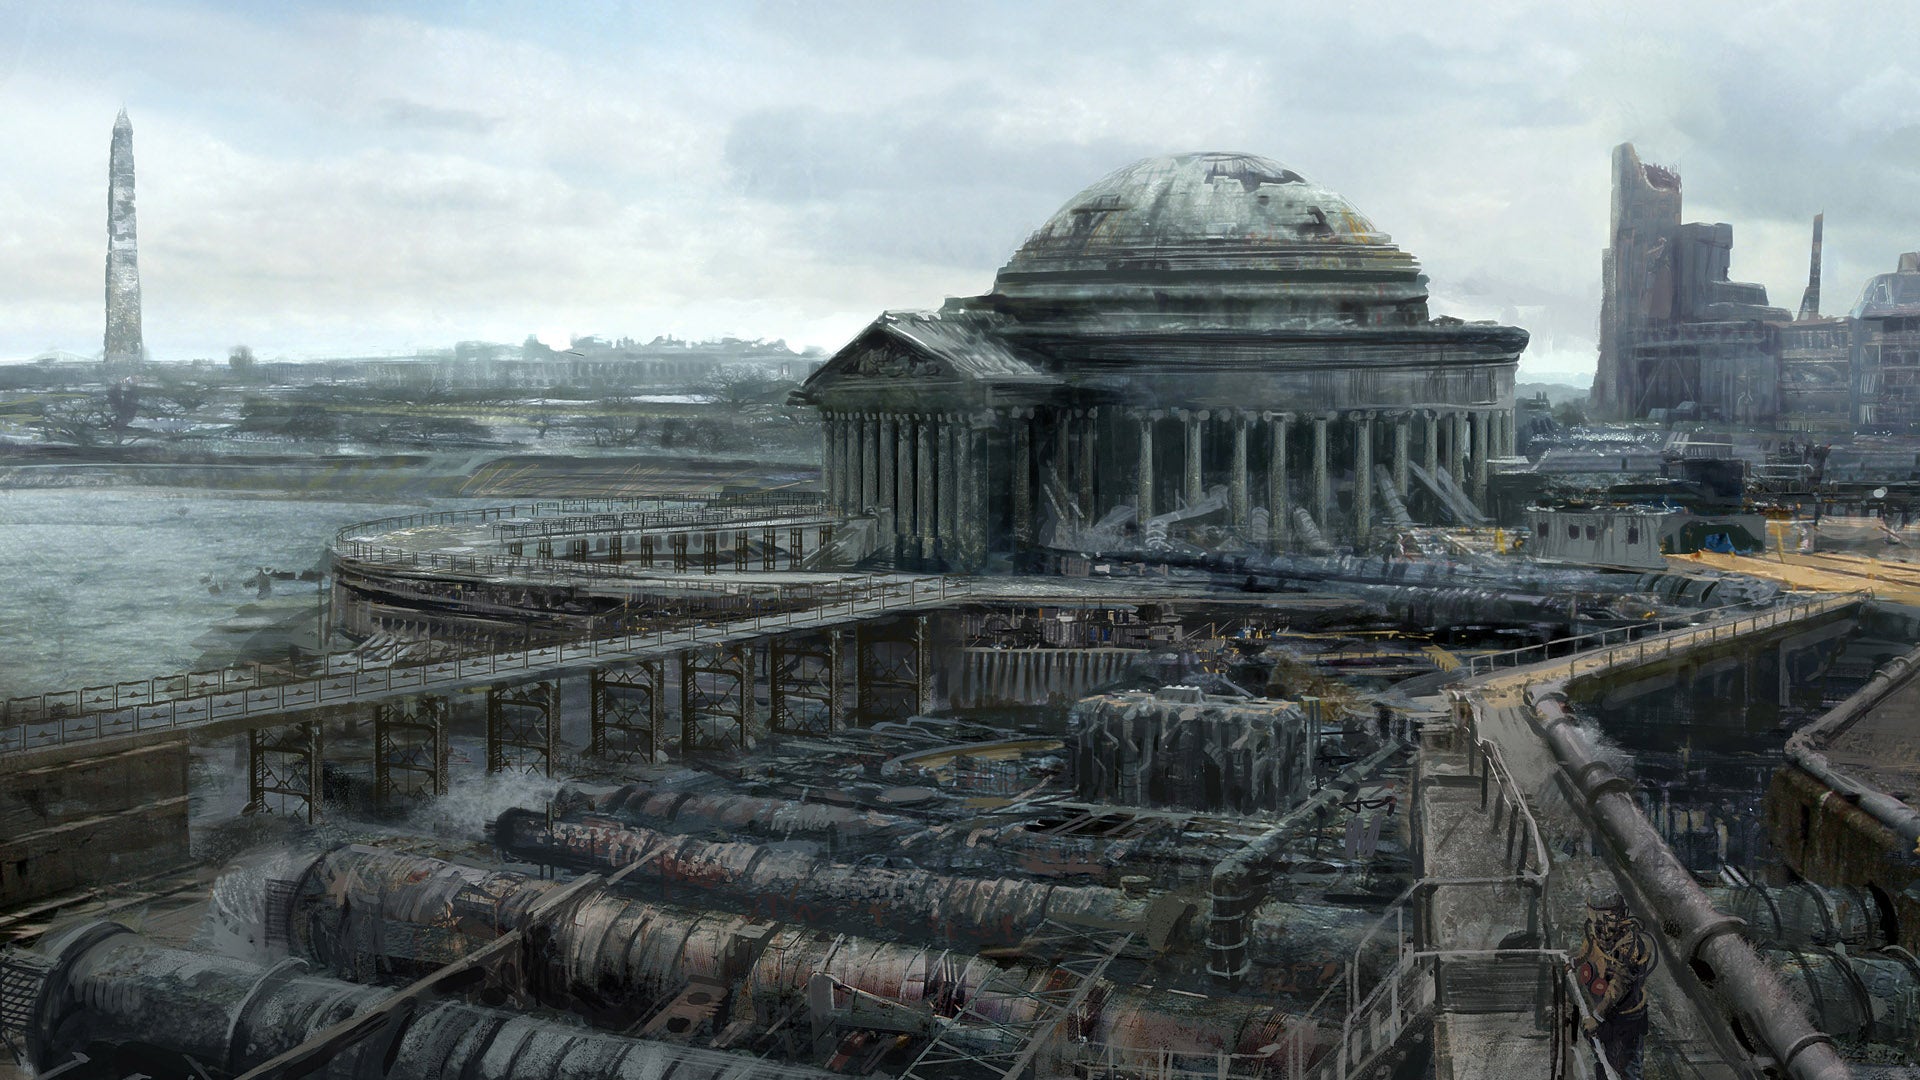 Weekly Wallpaper: Imagine The World's End With These Dystopian Ruins